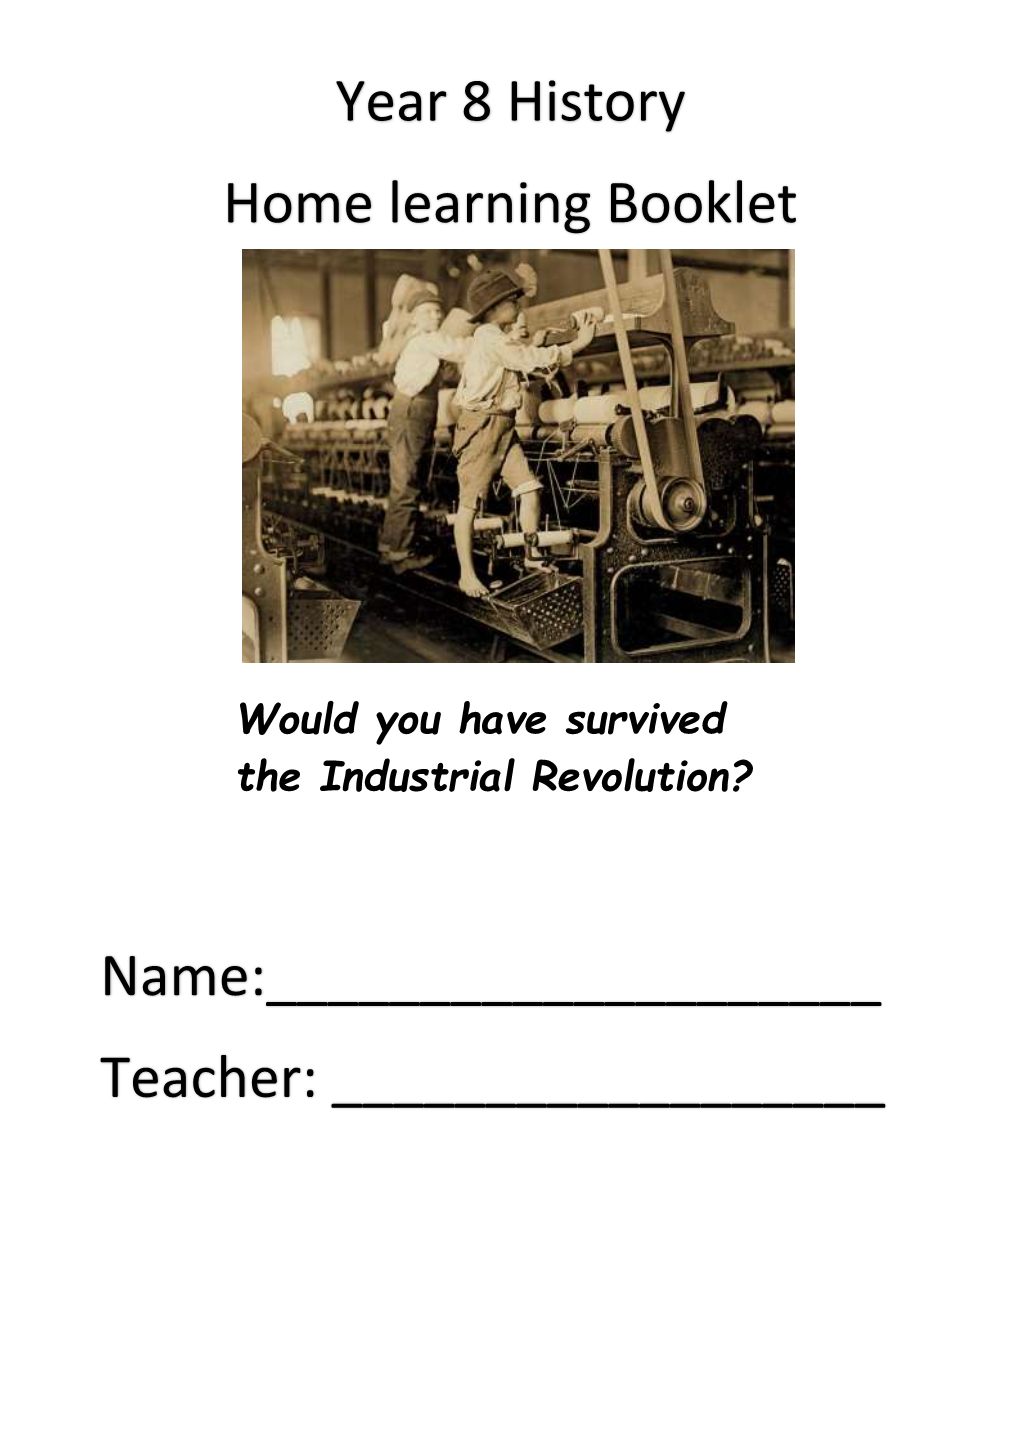 Year 8 History Home Learning Booklet Name